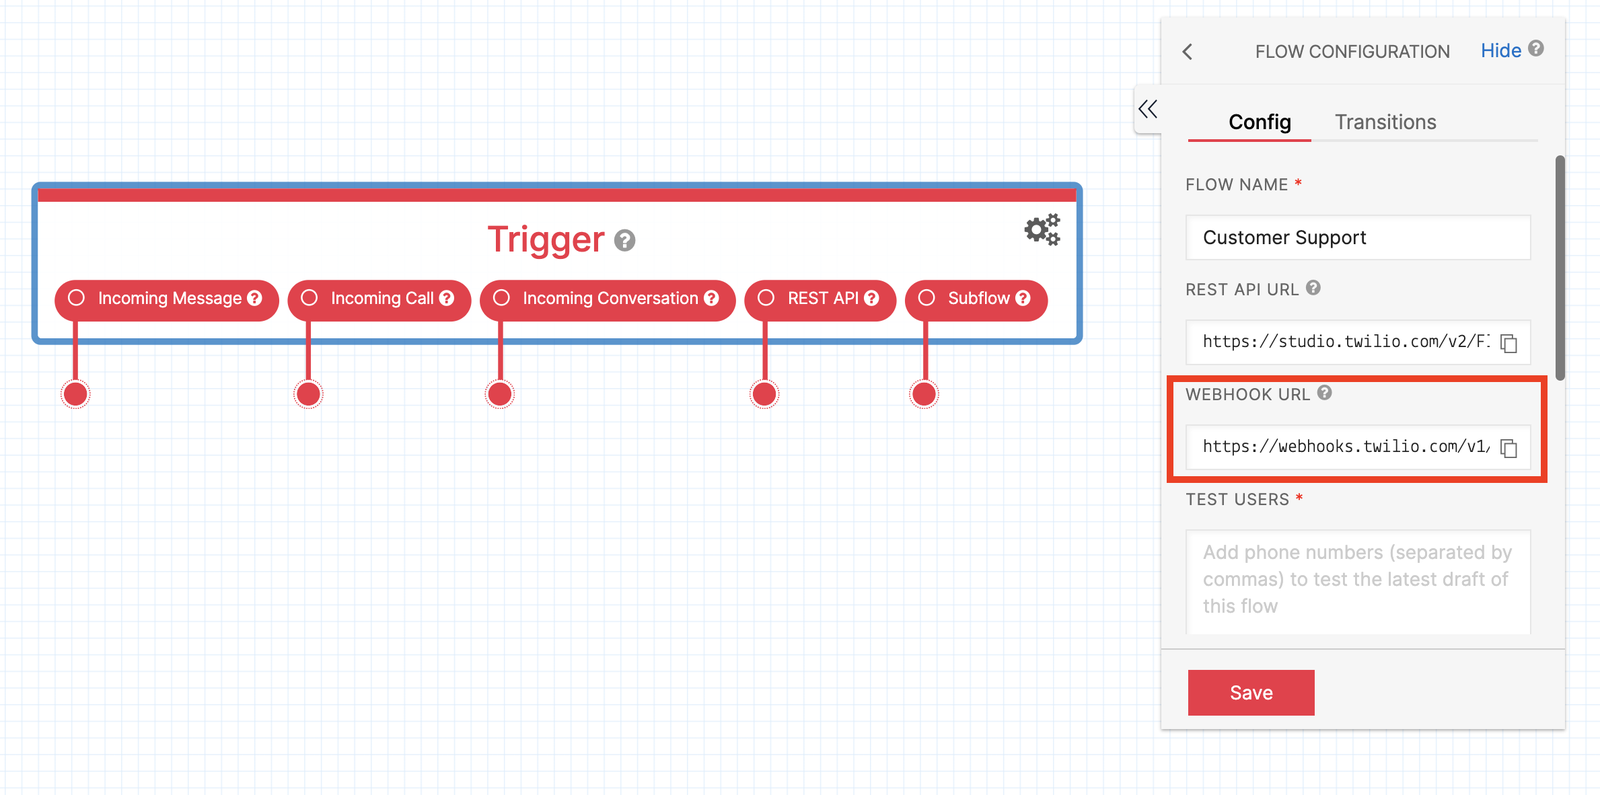 Twilio Studio Tutorial WhatsApp Customer Support Trigger Widget with webhook shown in configuration panel to the right.